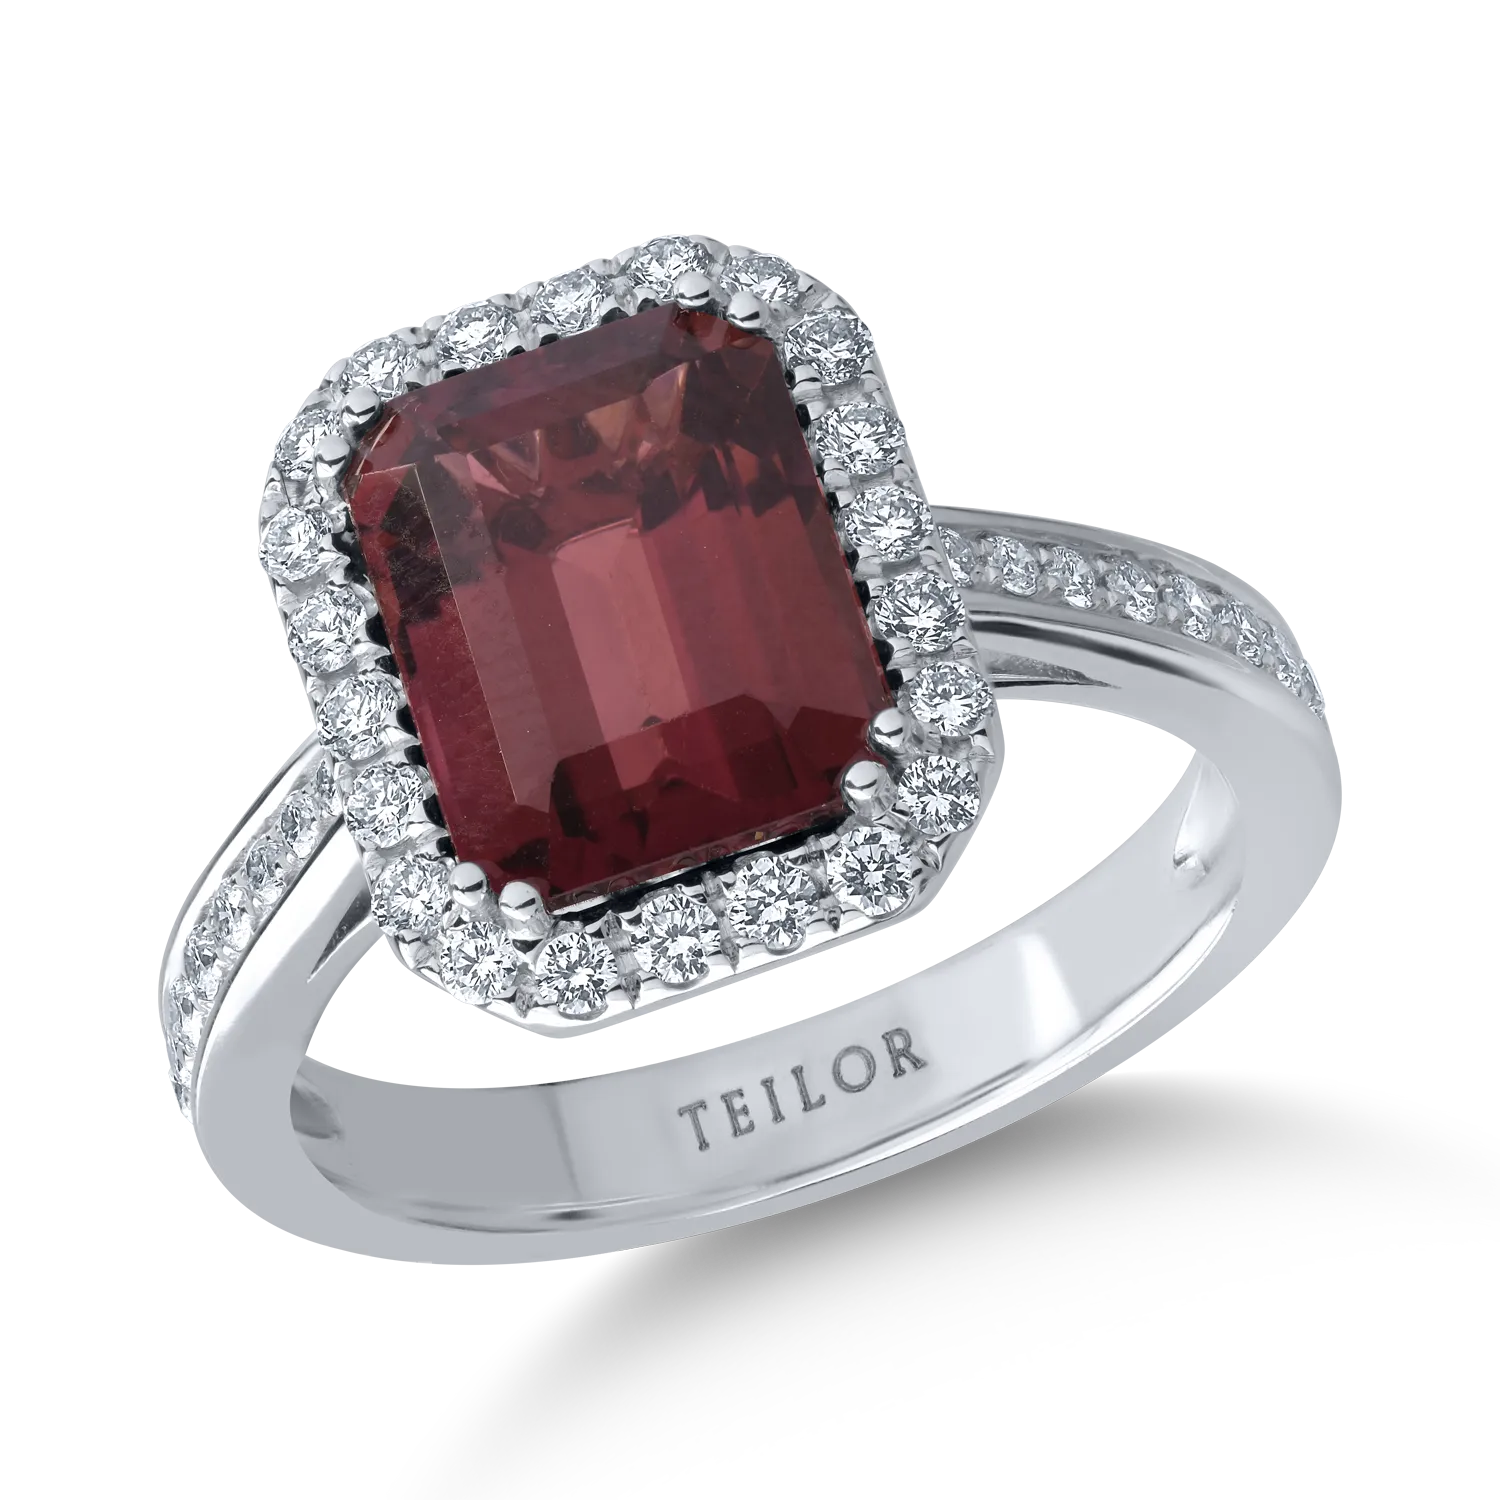 18K white gold ring with 3.02ct pink tourmaline and 0.43ct diamonds